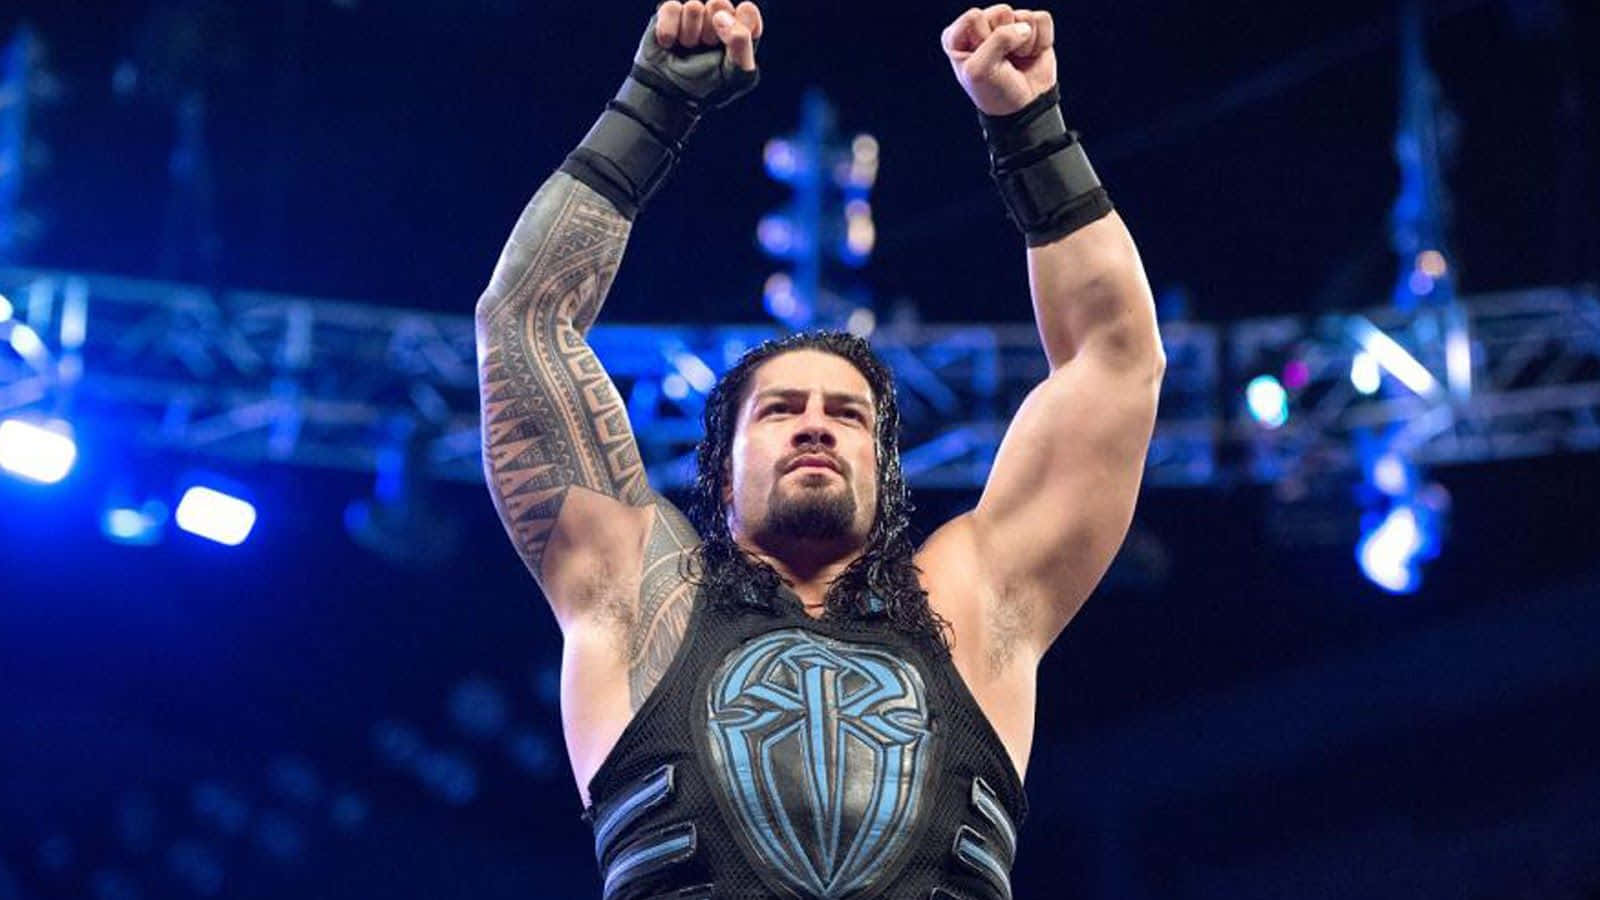 Roman Reigns prepares to enter the ring.